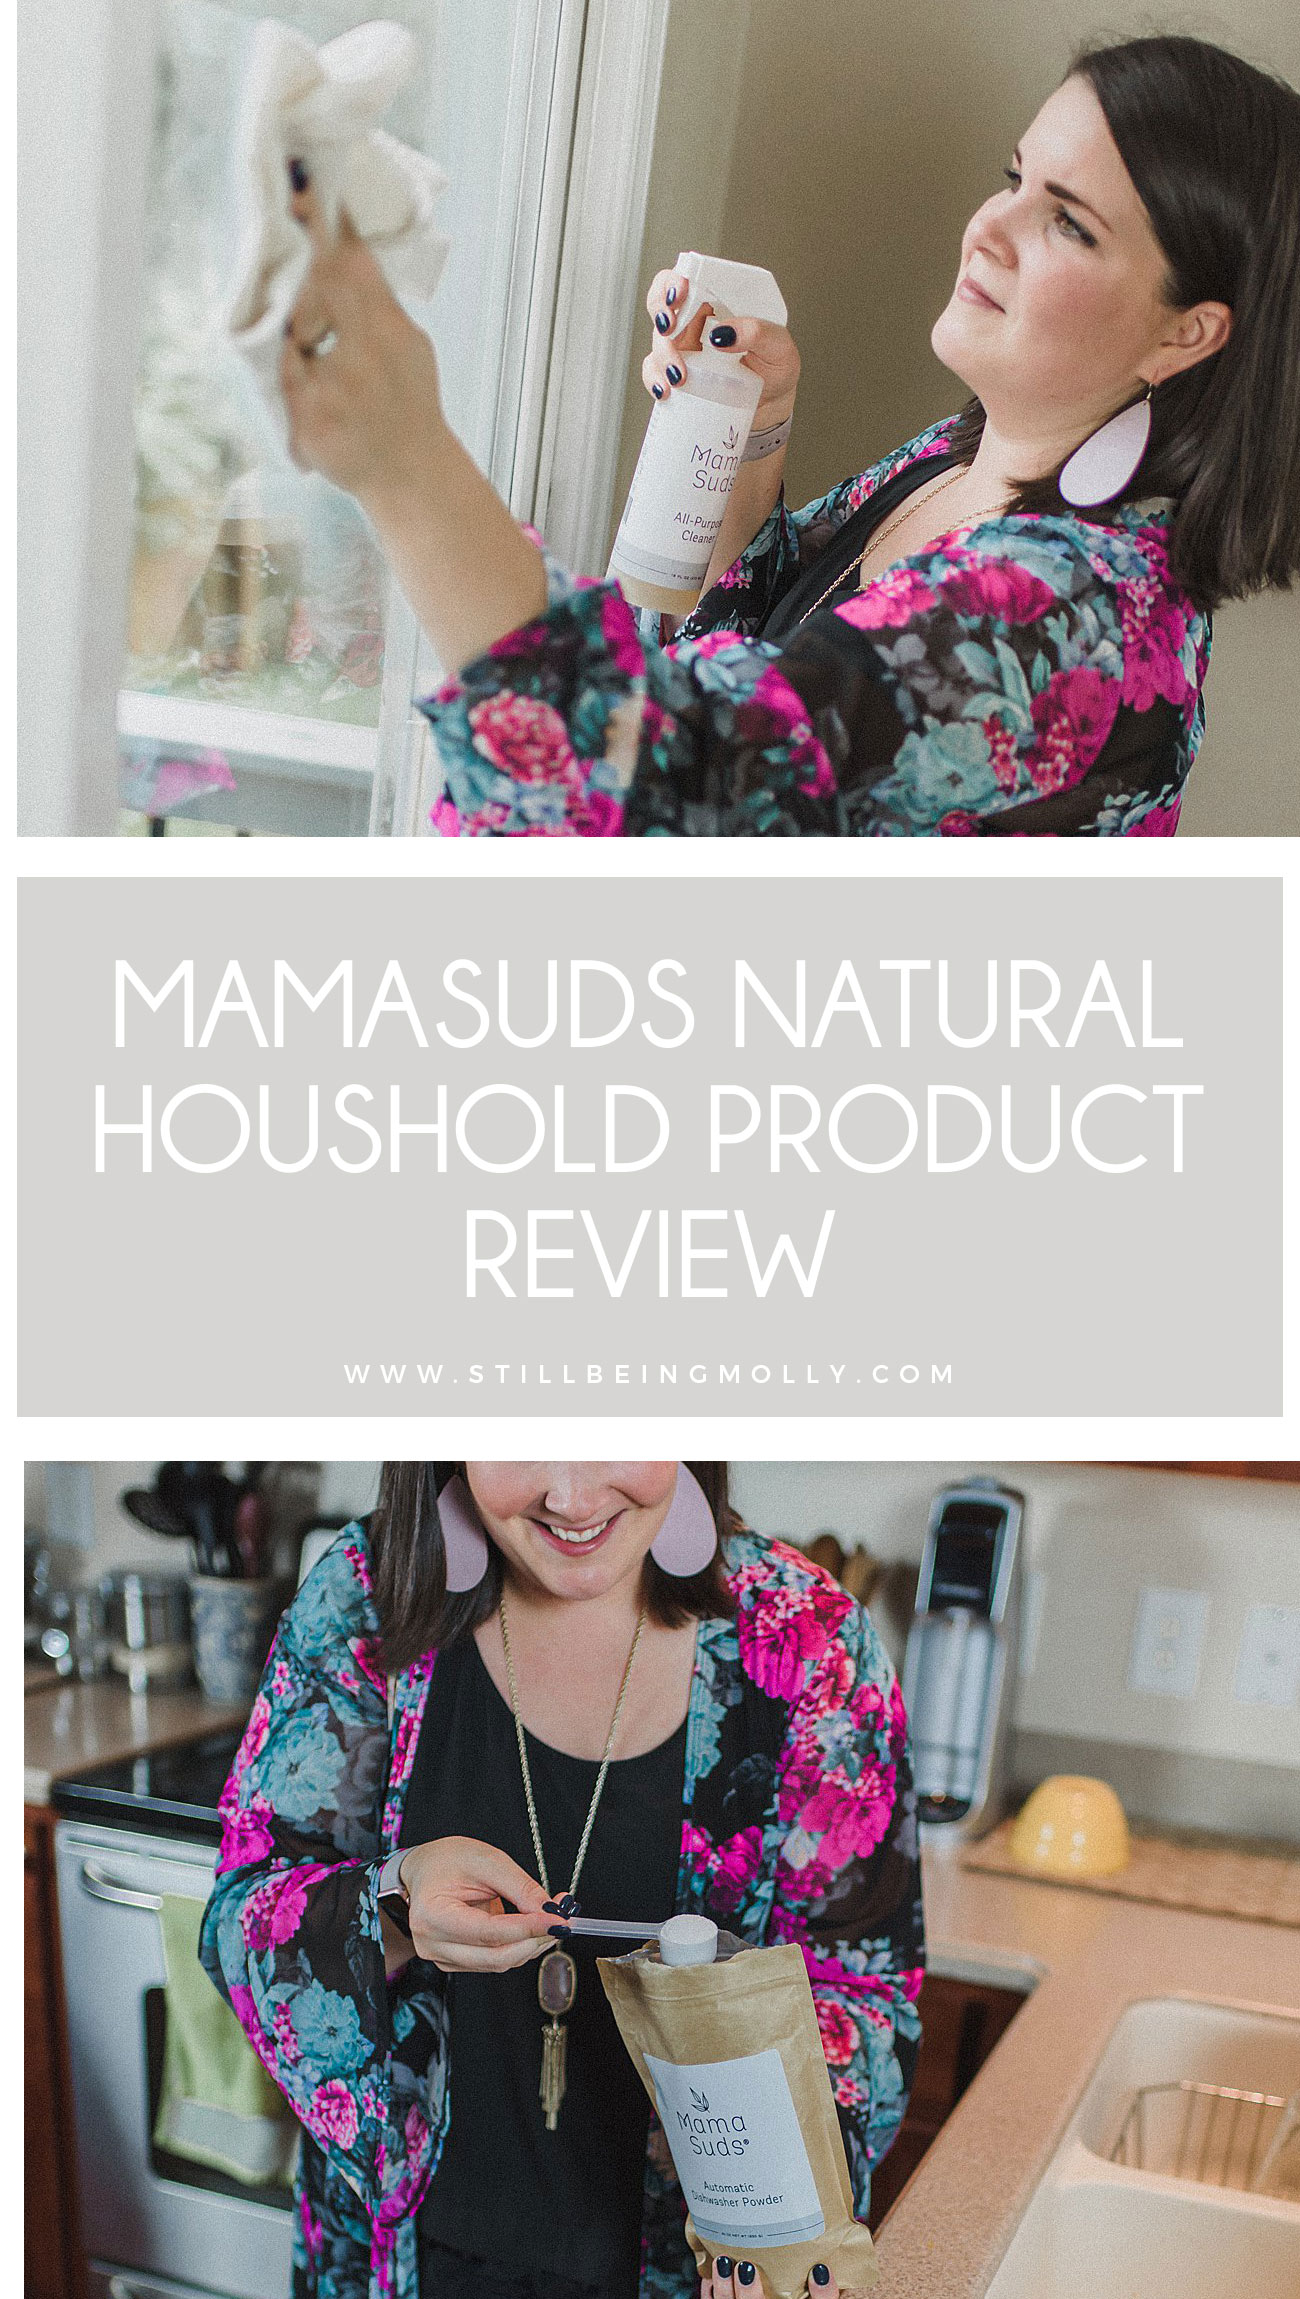 Mamasuds All Natural Household Cleaning Products Review